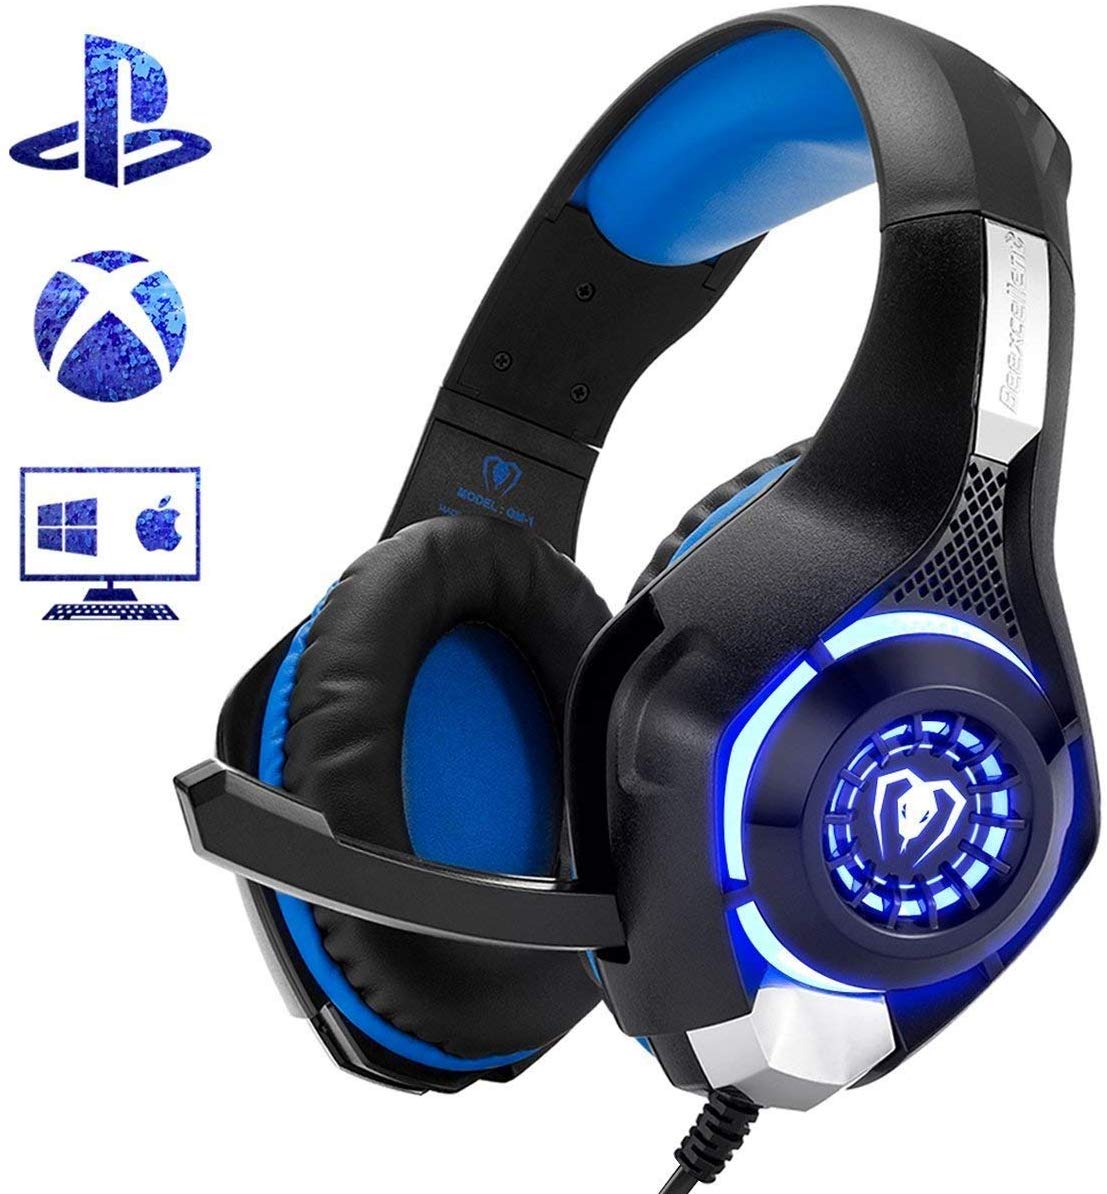 Beexcellent Gaming Headset for PS4 Xbox One PC Mac Controller Gaming Headphone with Crystal Stereo Bass Surround Sound, LED Light & Noise-Isolation...